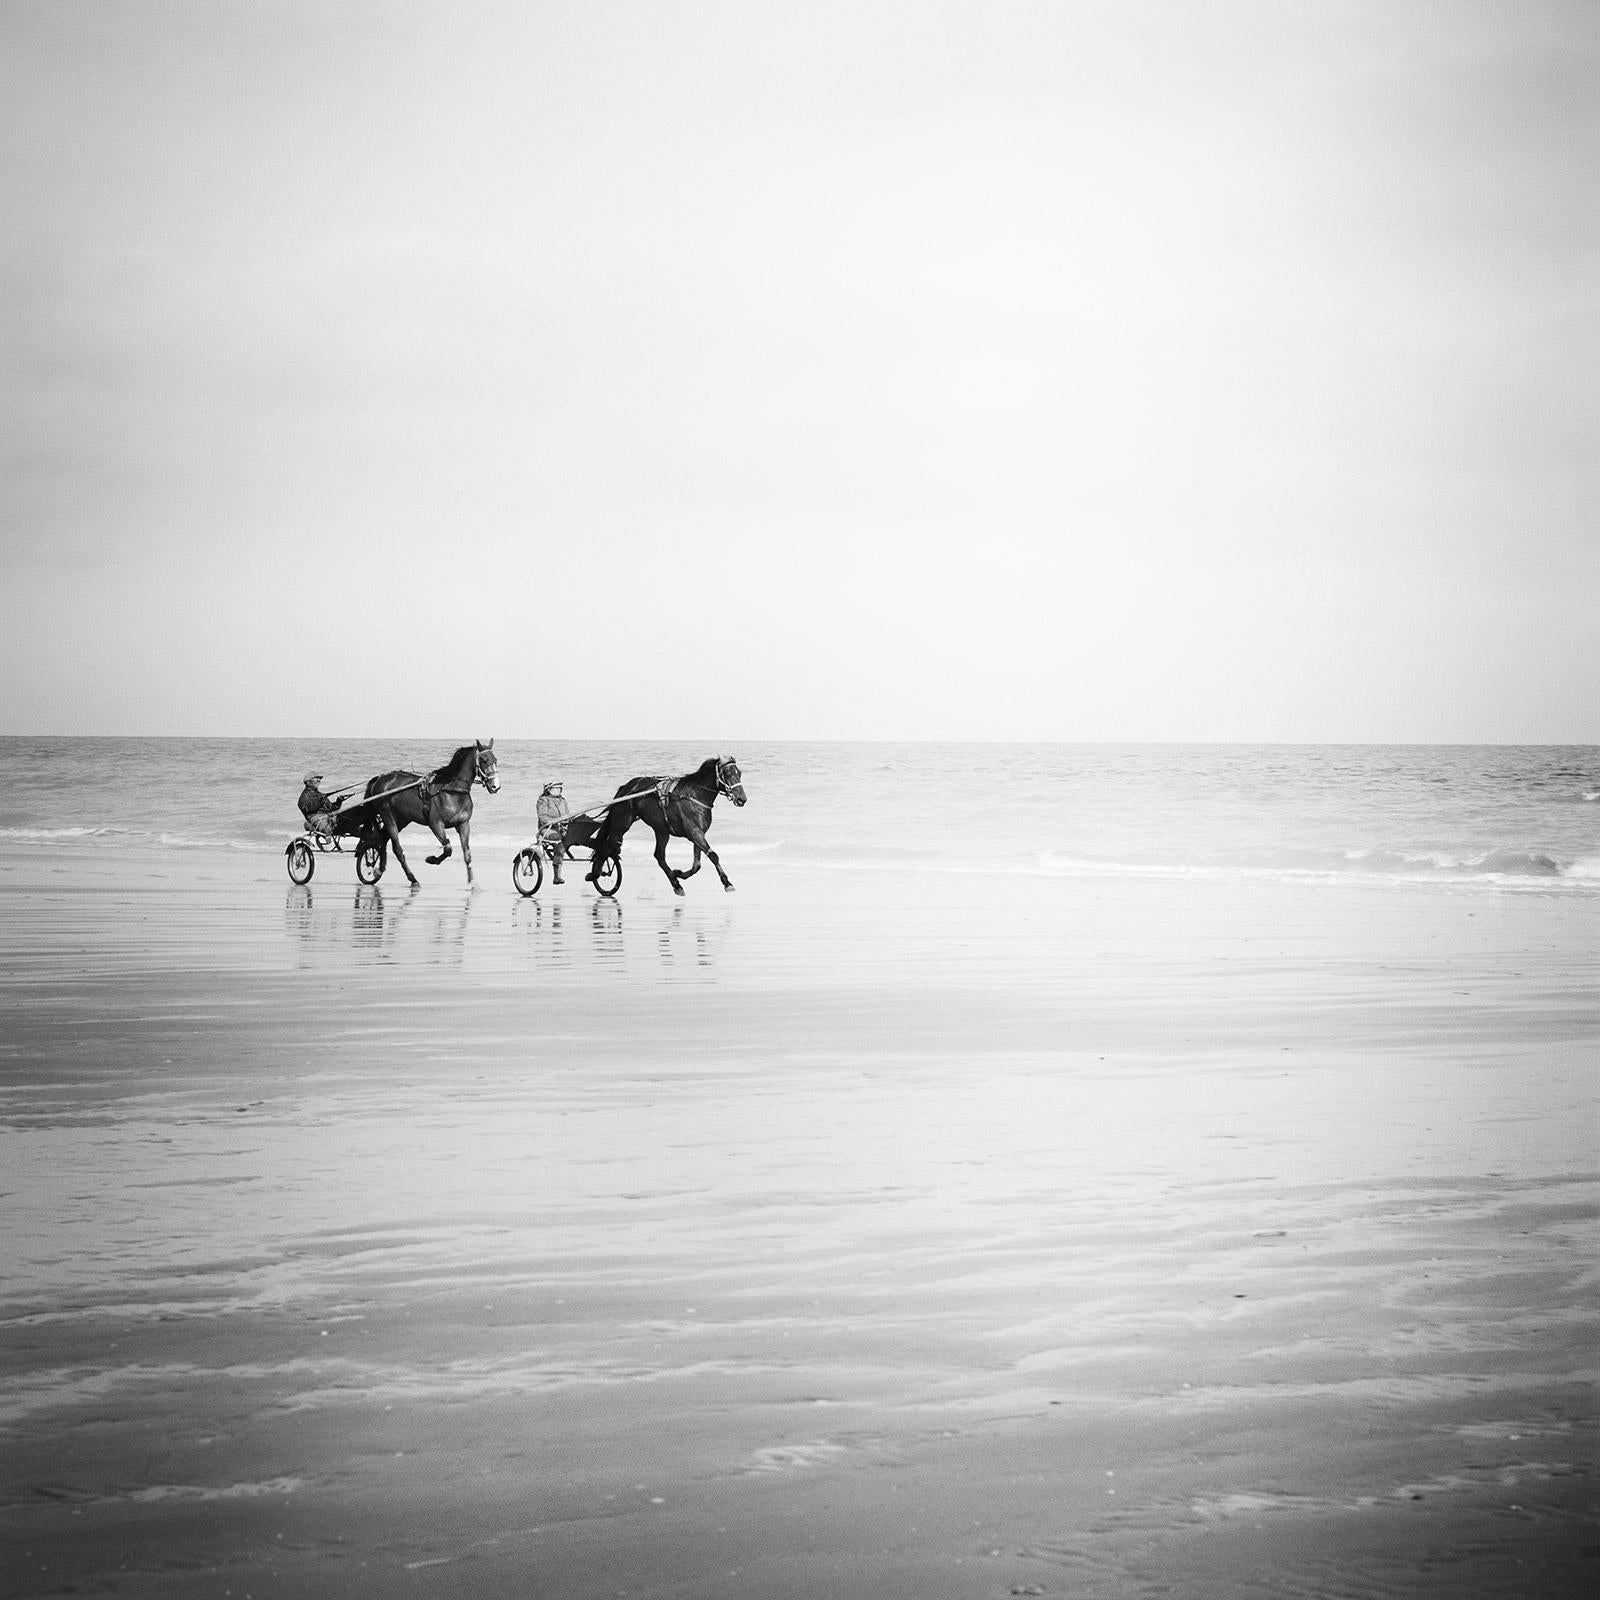 Gerald Berghammer Landscape Photograph - Harness Racing, horses on the beach, France, black white landscape photography